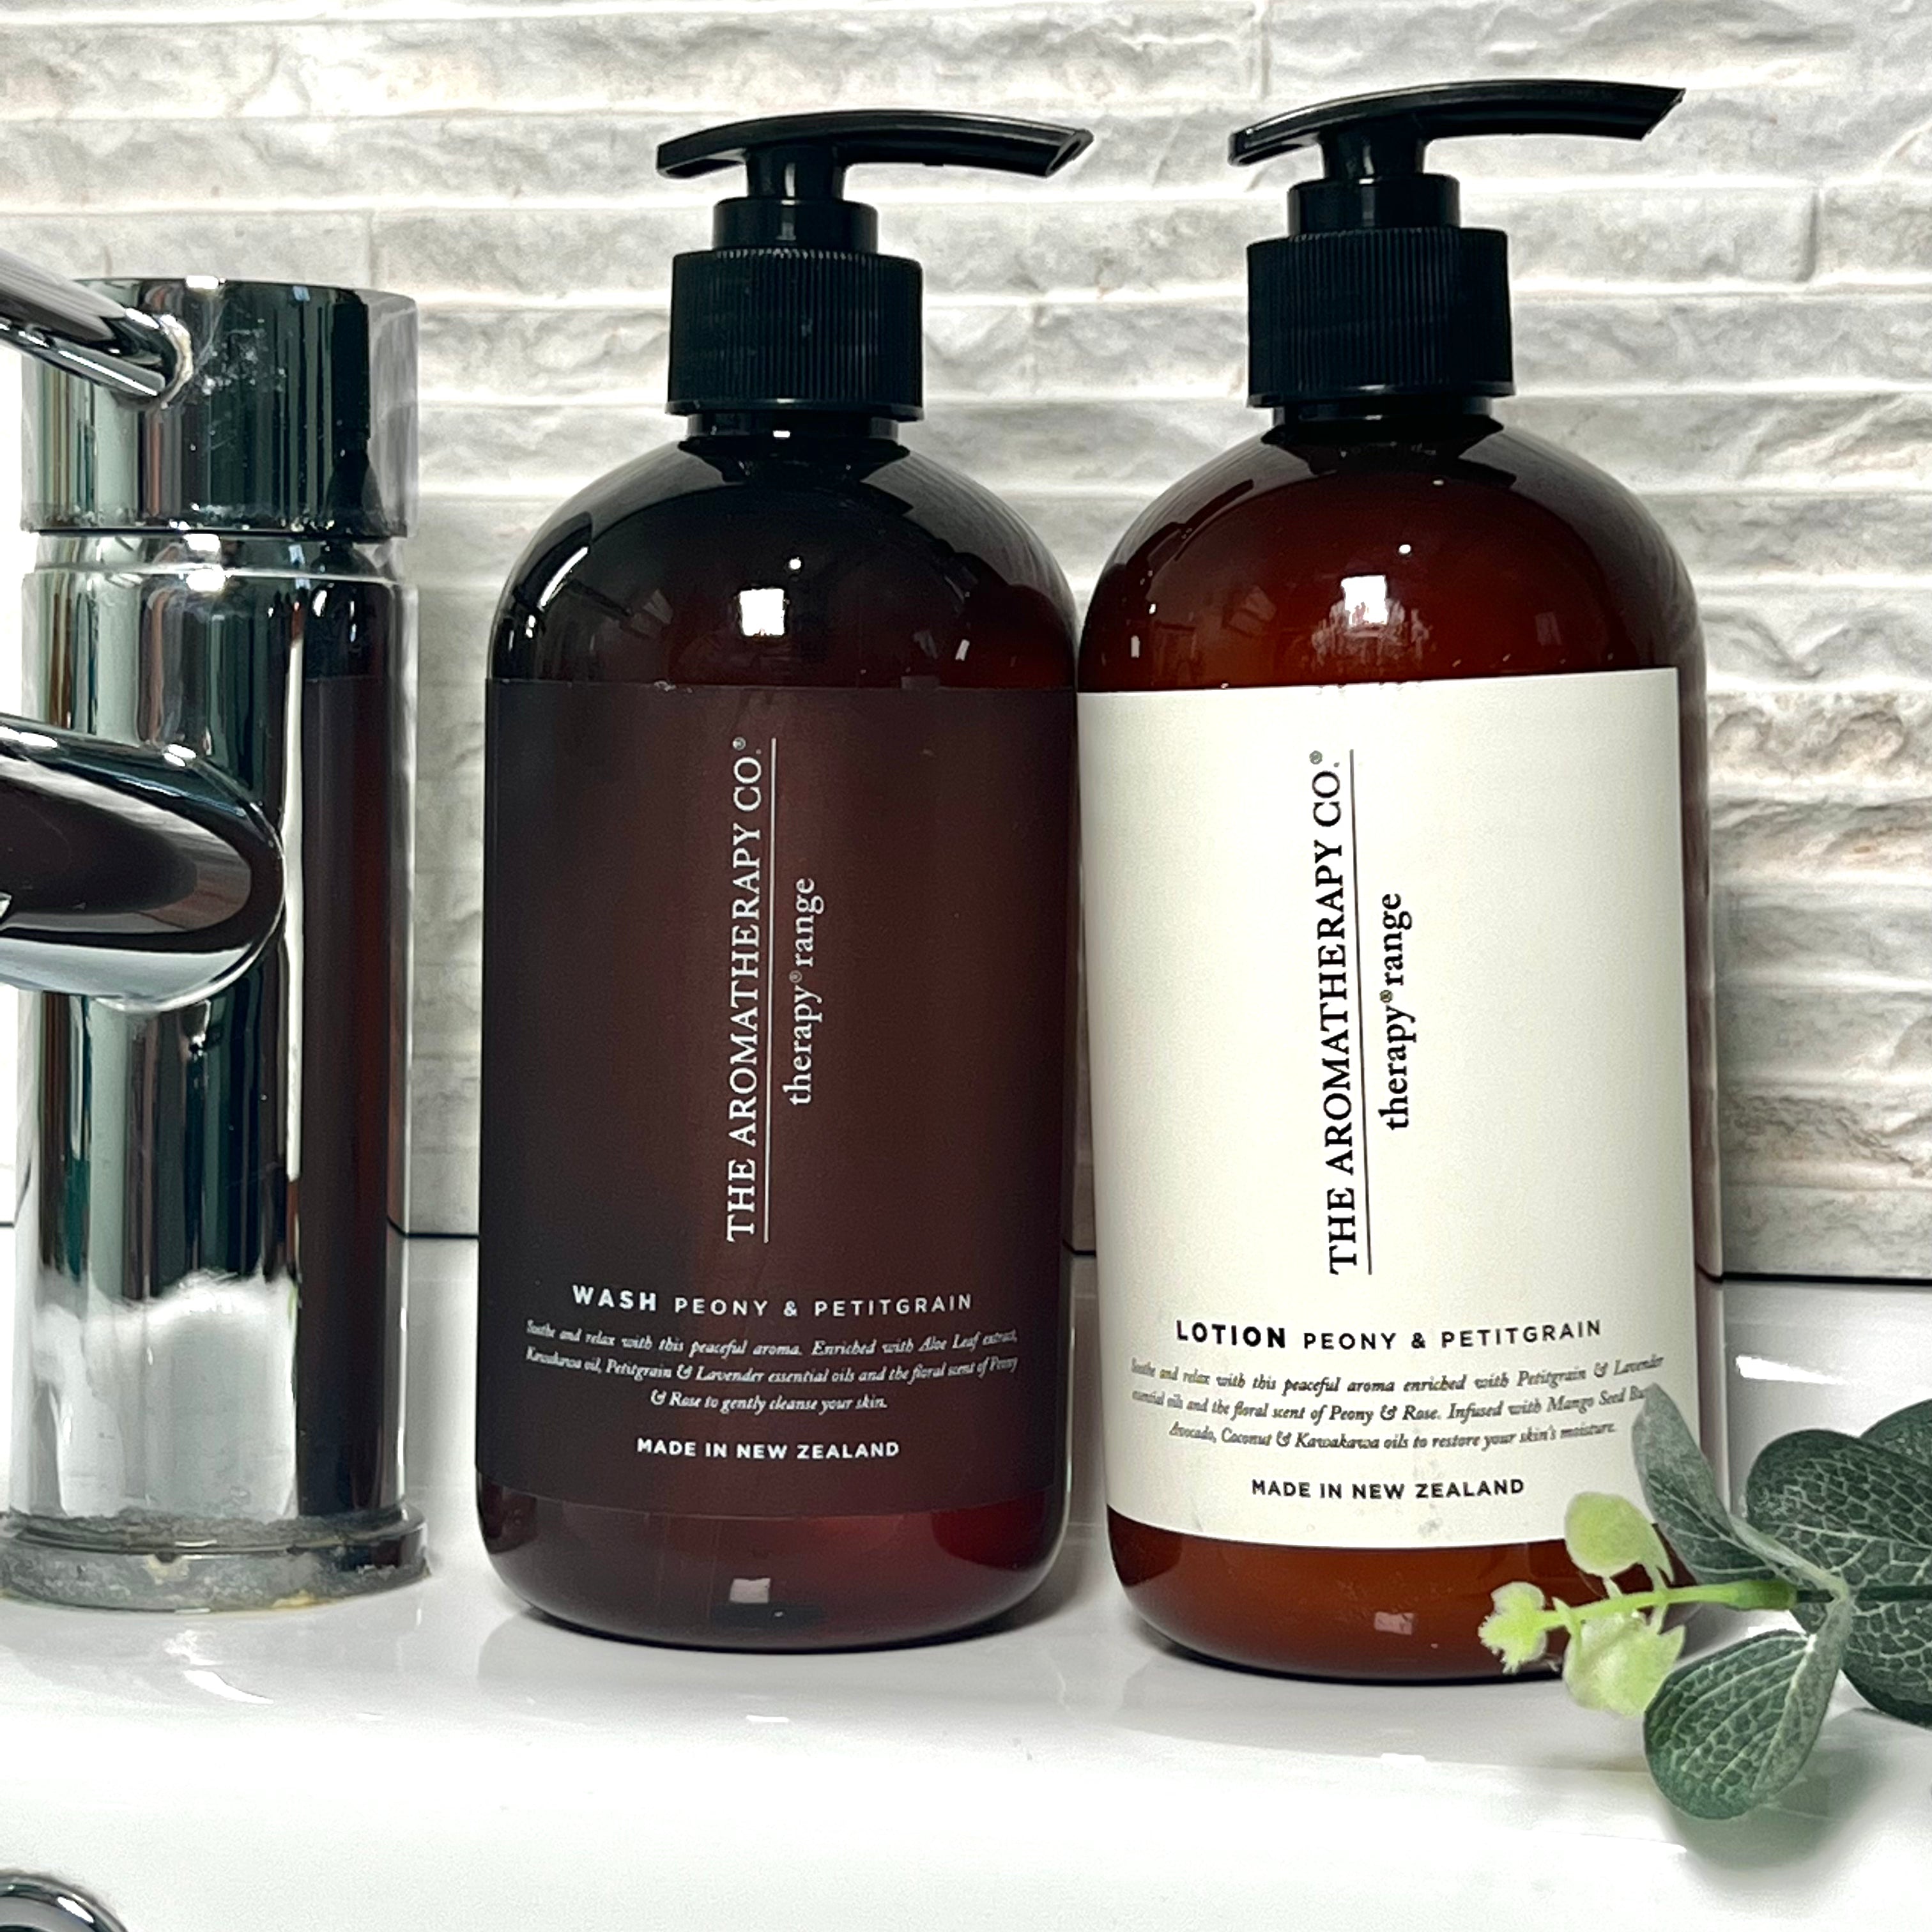 The Aromatherapy Co Therapy Range Soothe Petitgrain & Peony Wash